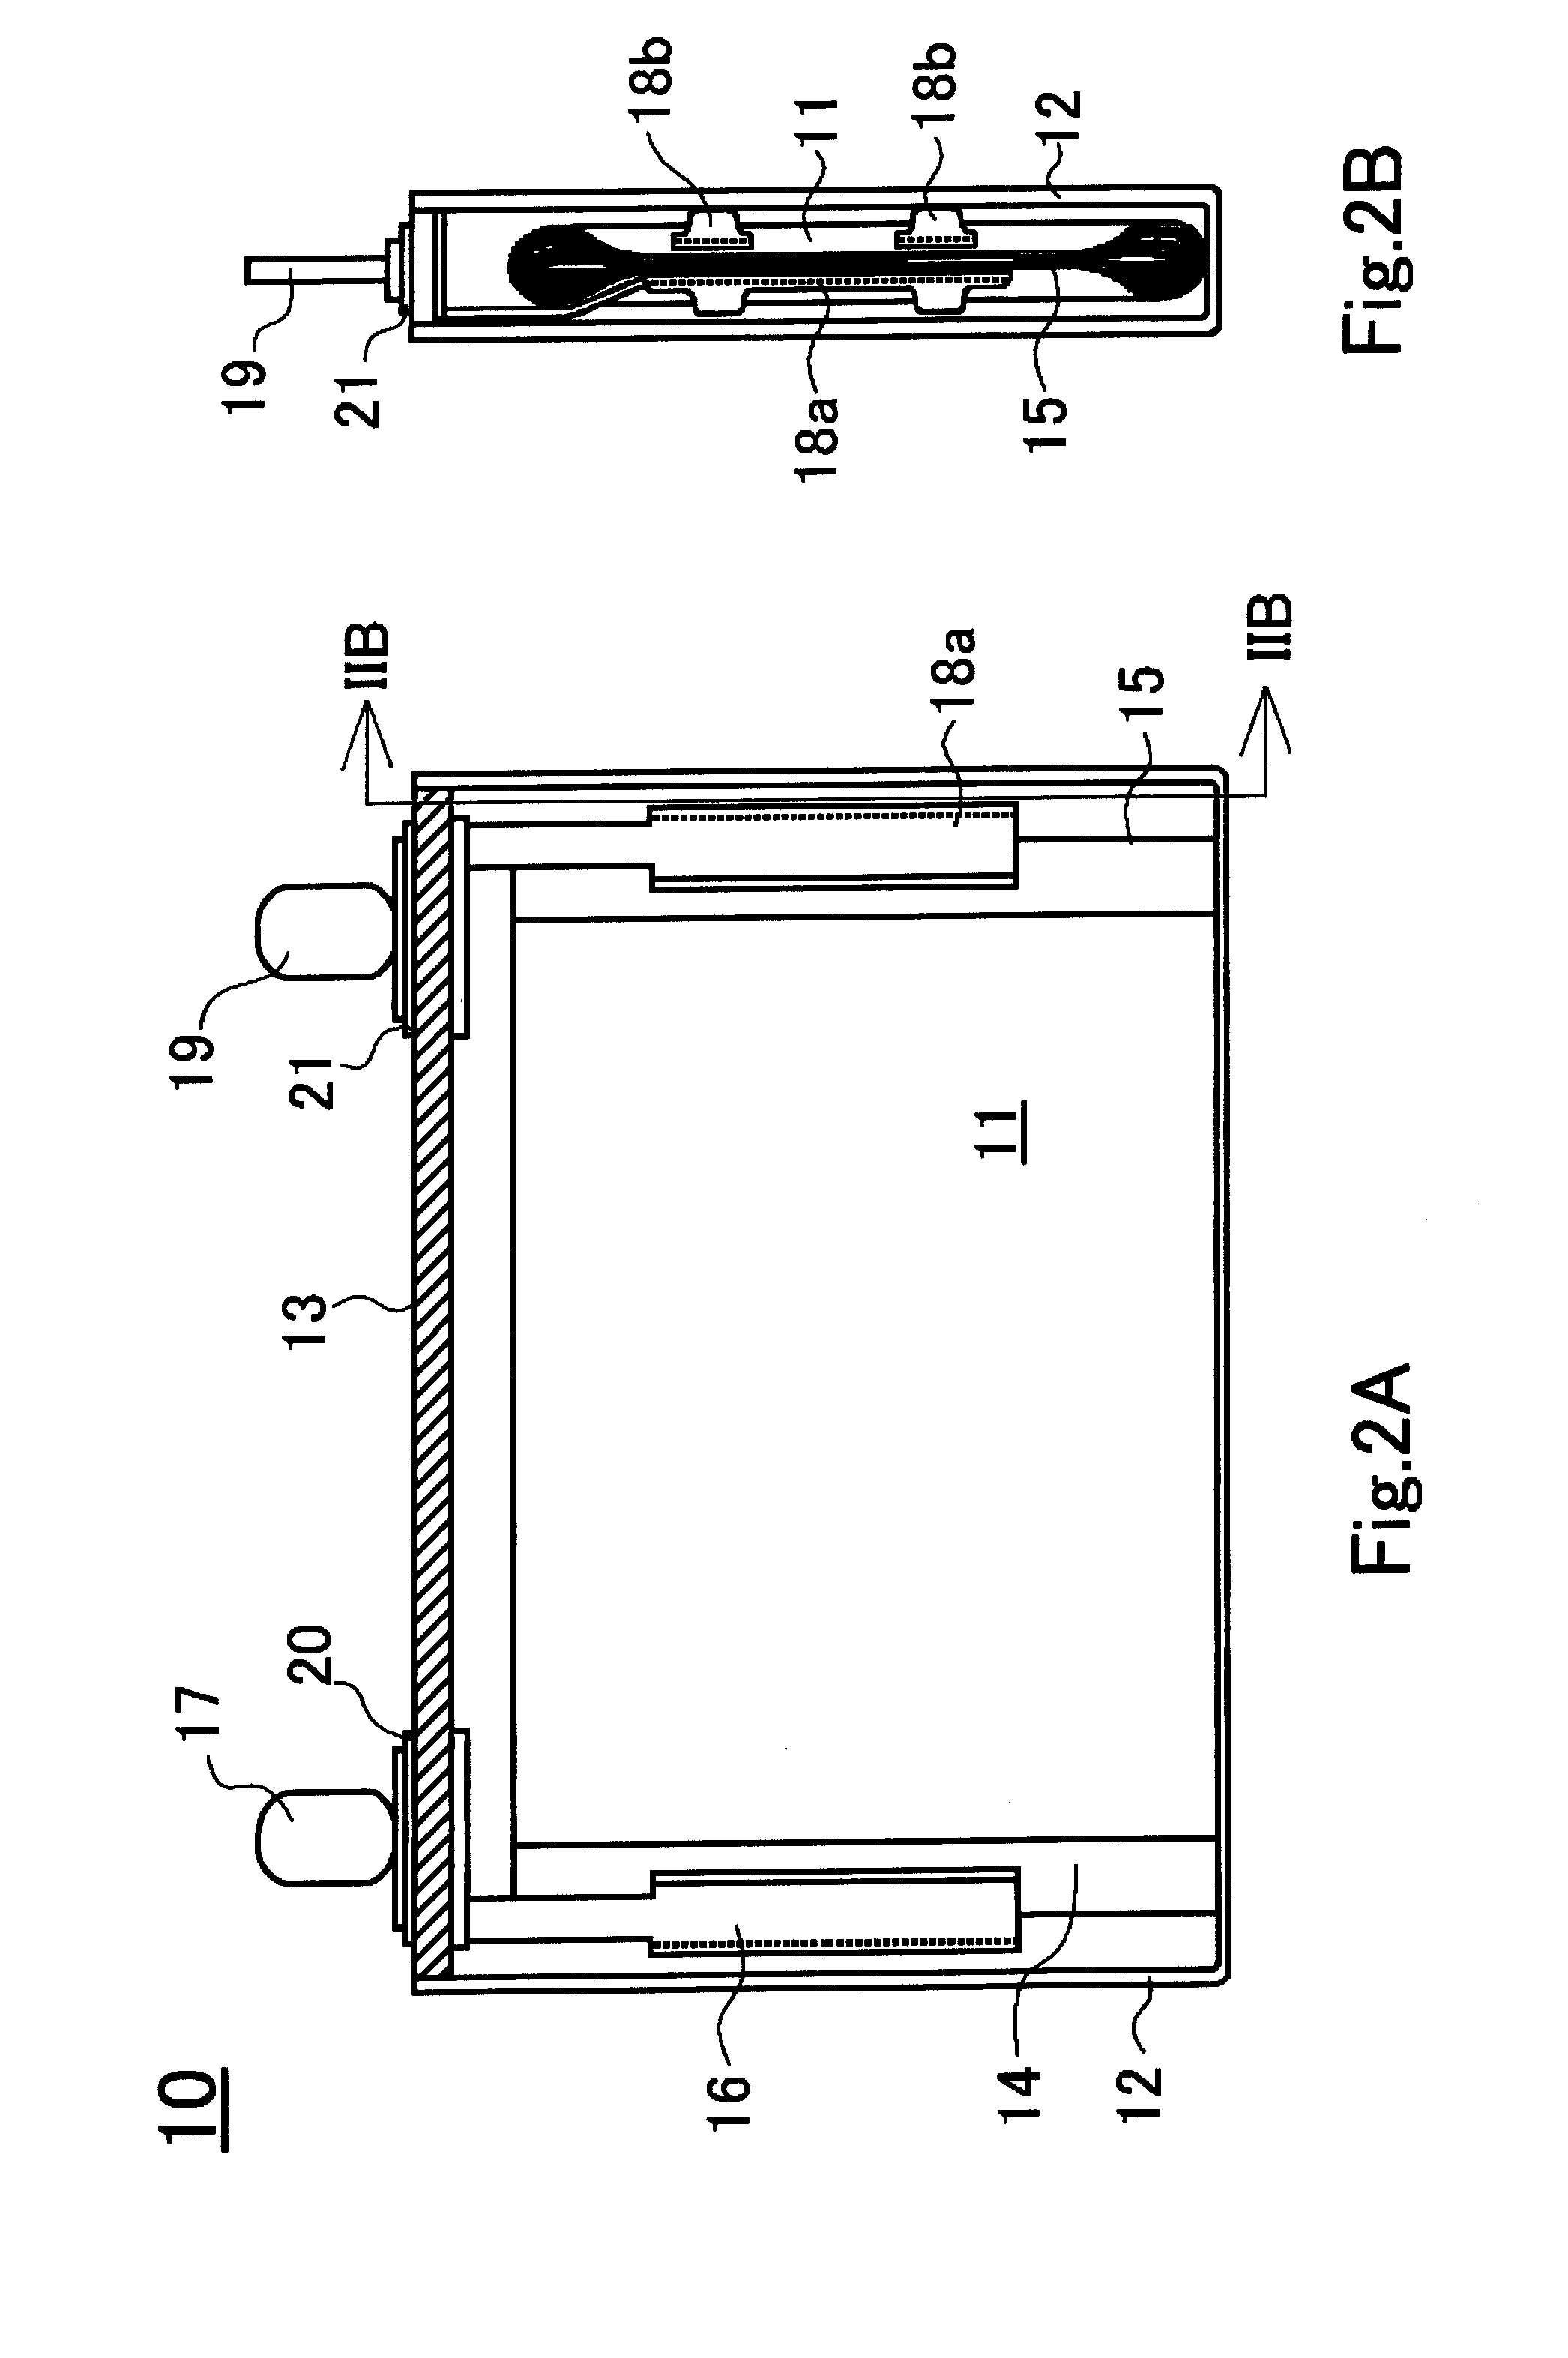 Method for producing sealed battery